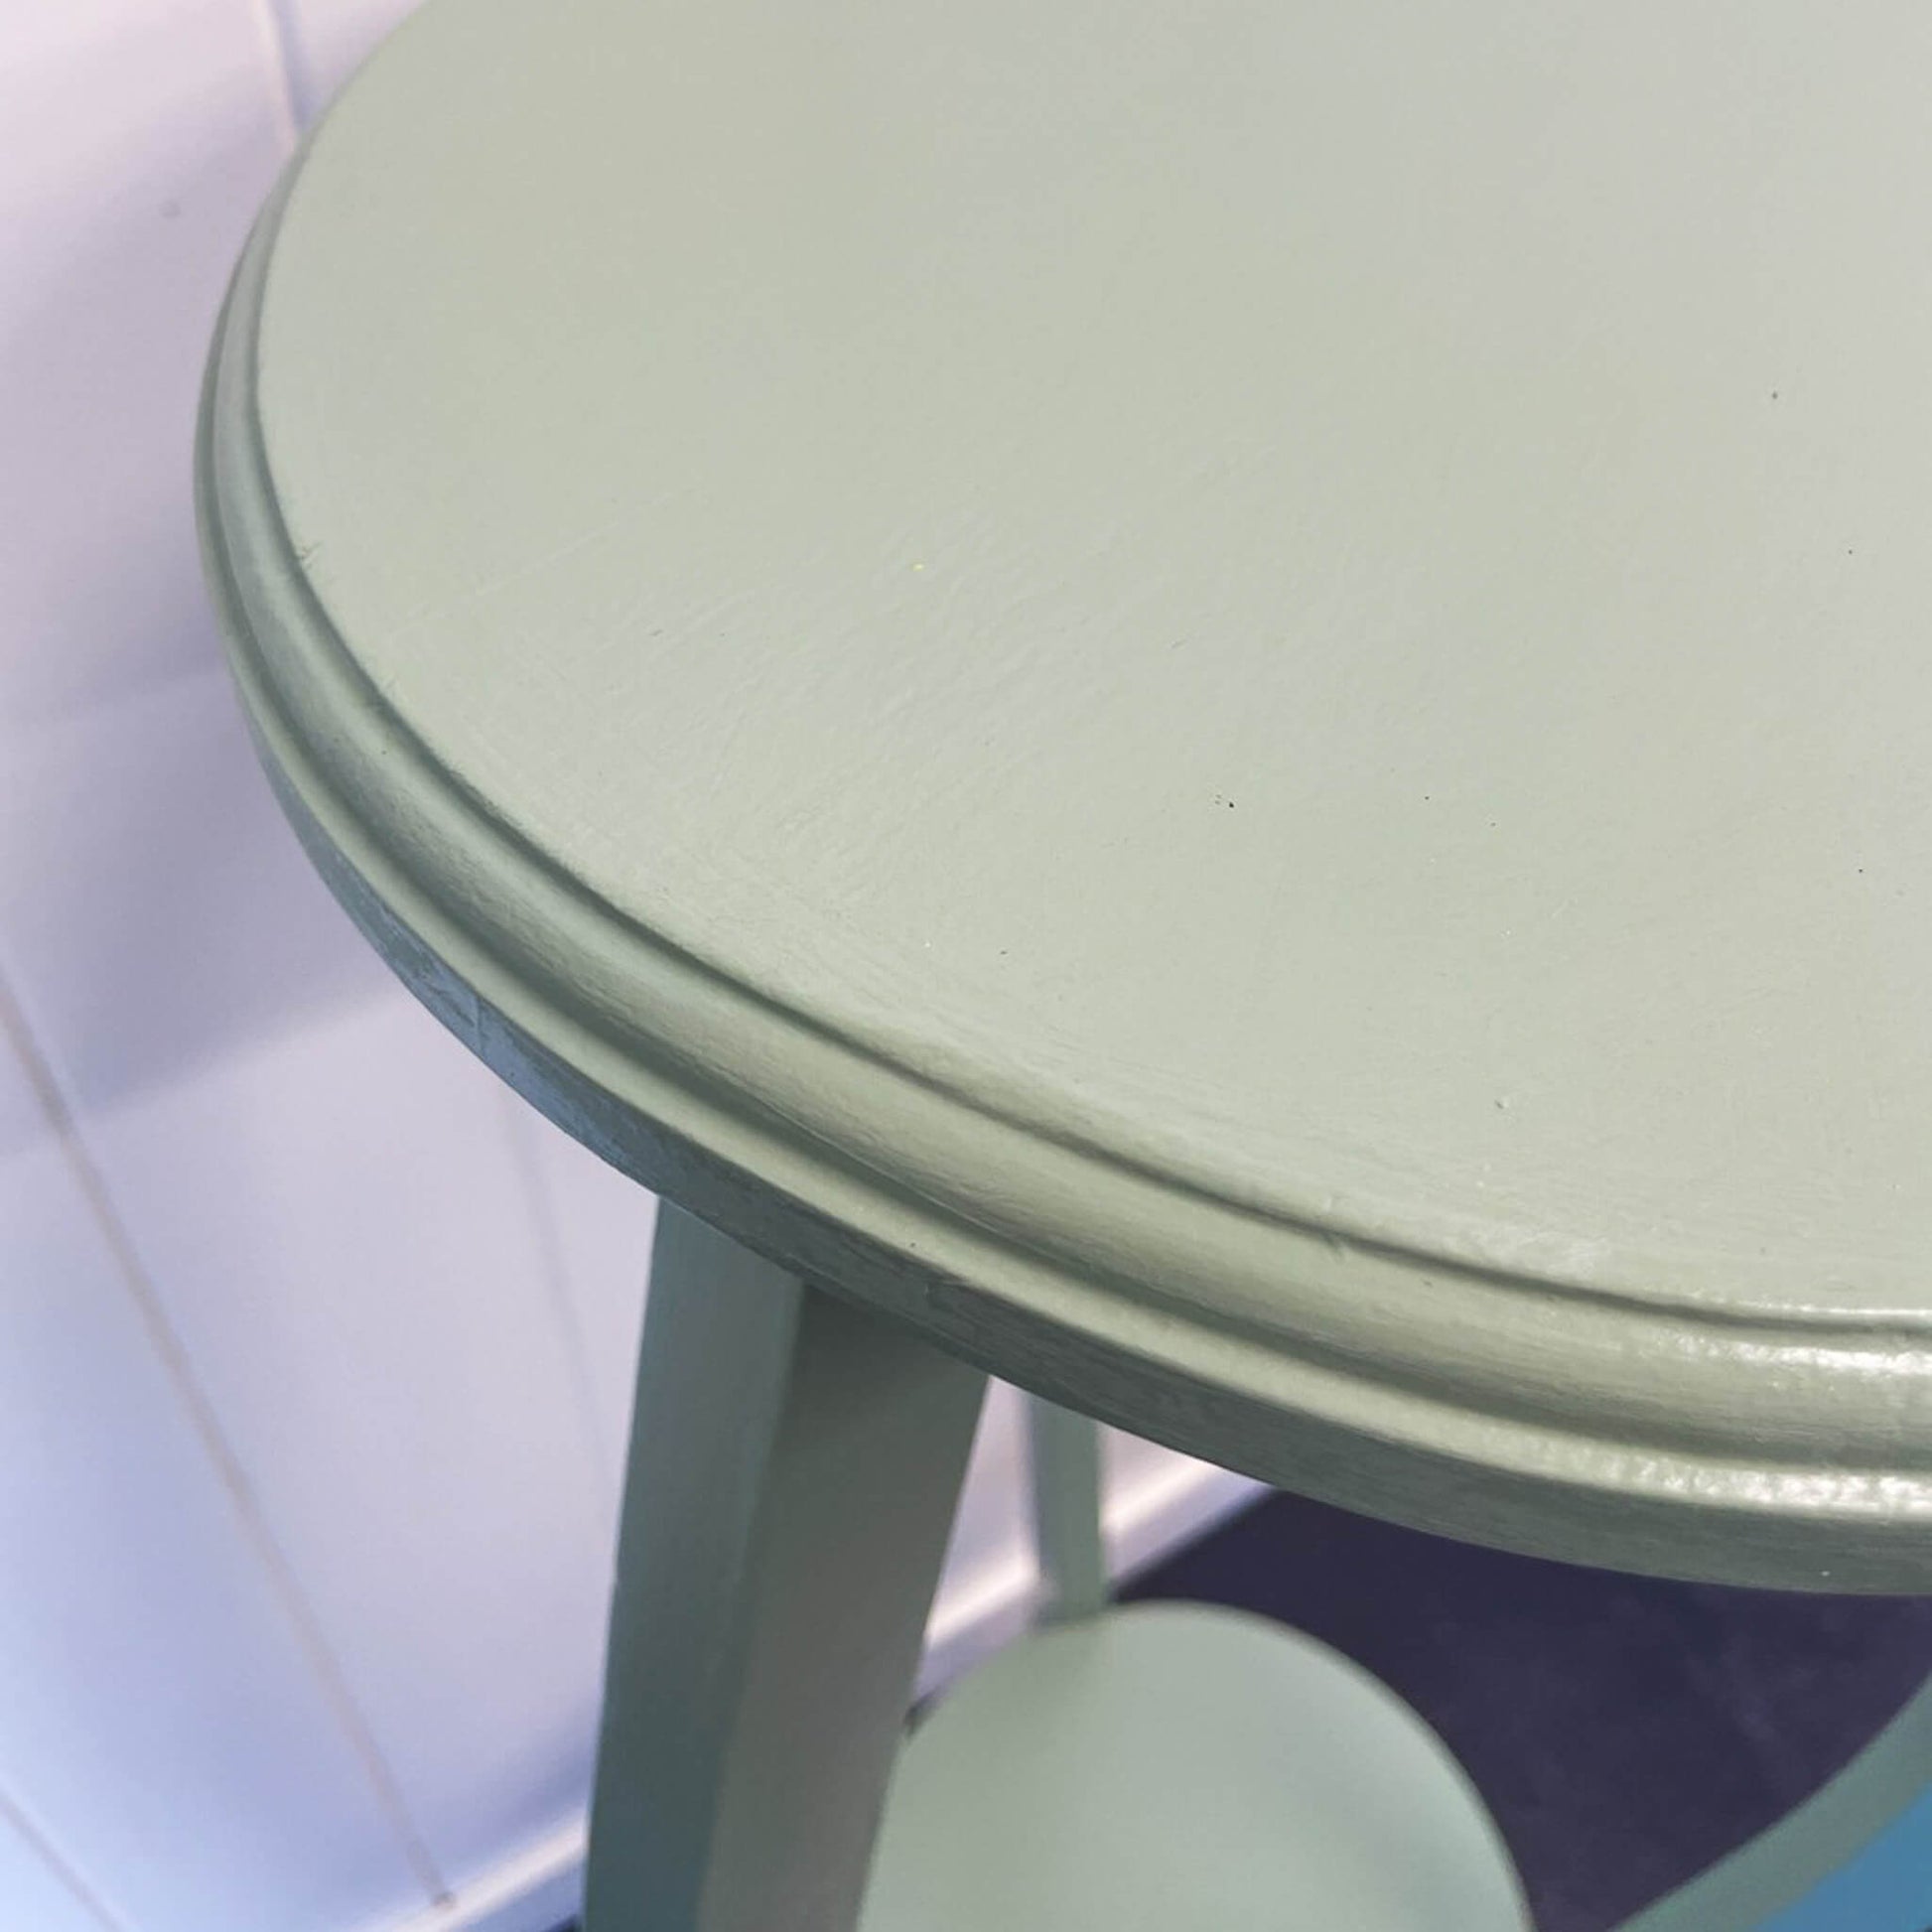 Timber stool painted Kettle Green using Blake & Taylor Chalk Furniture Paint